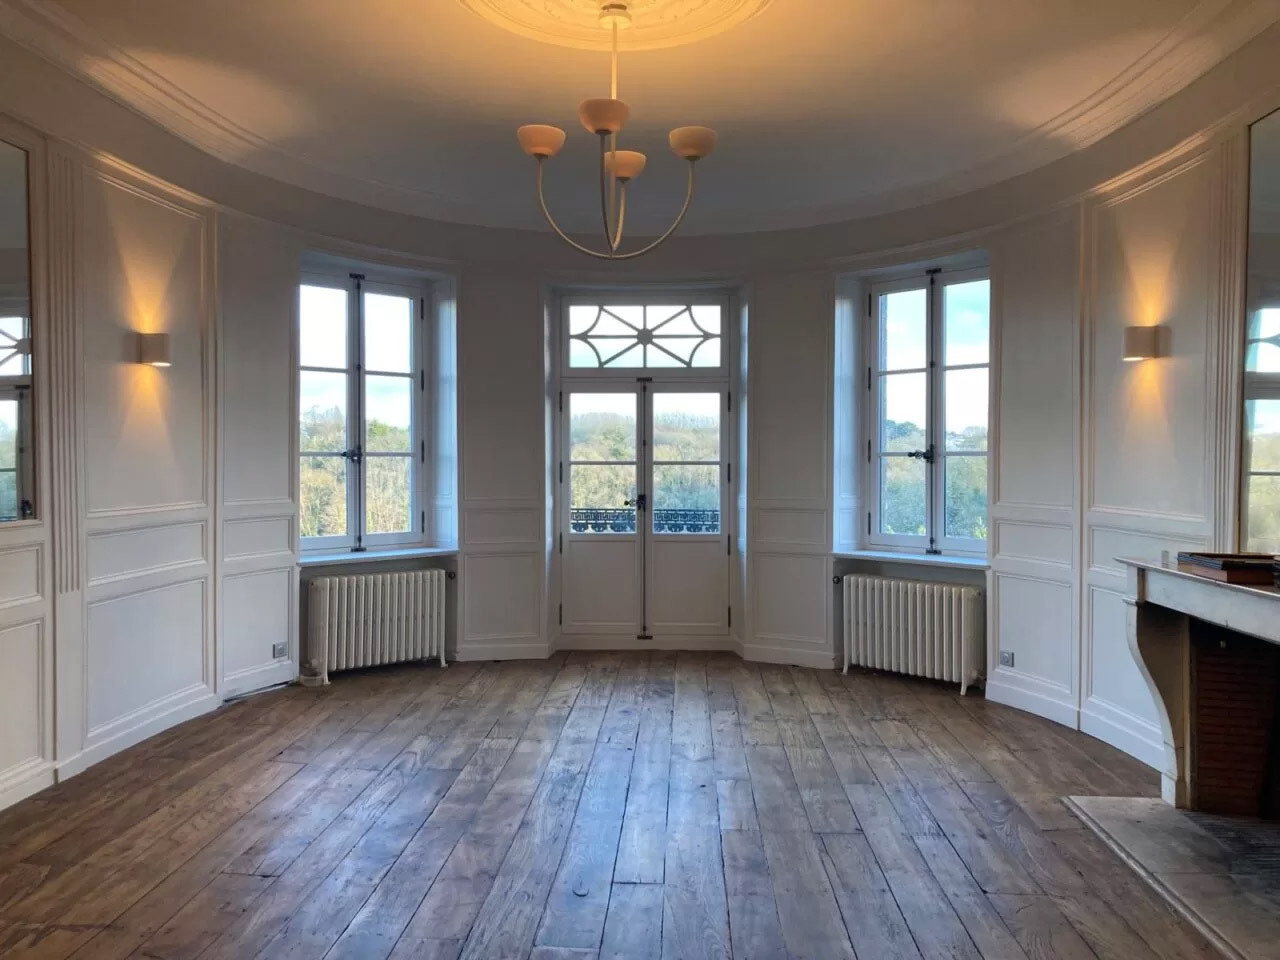 Oval room, freshly painted white, wooden floors have been refresh.